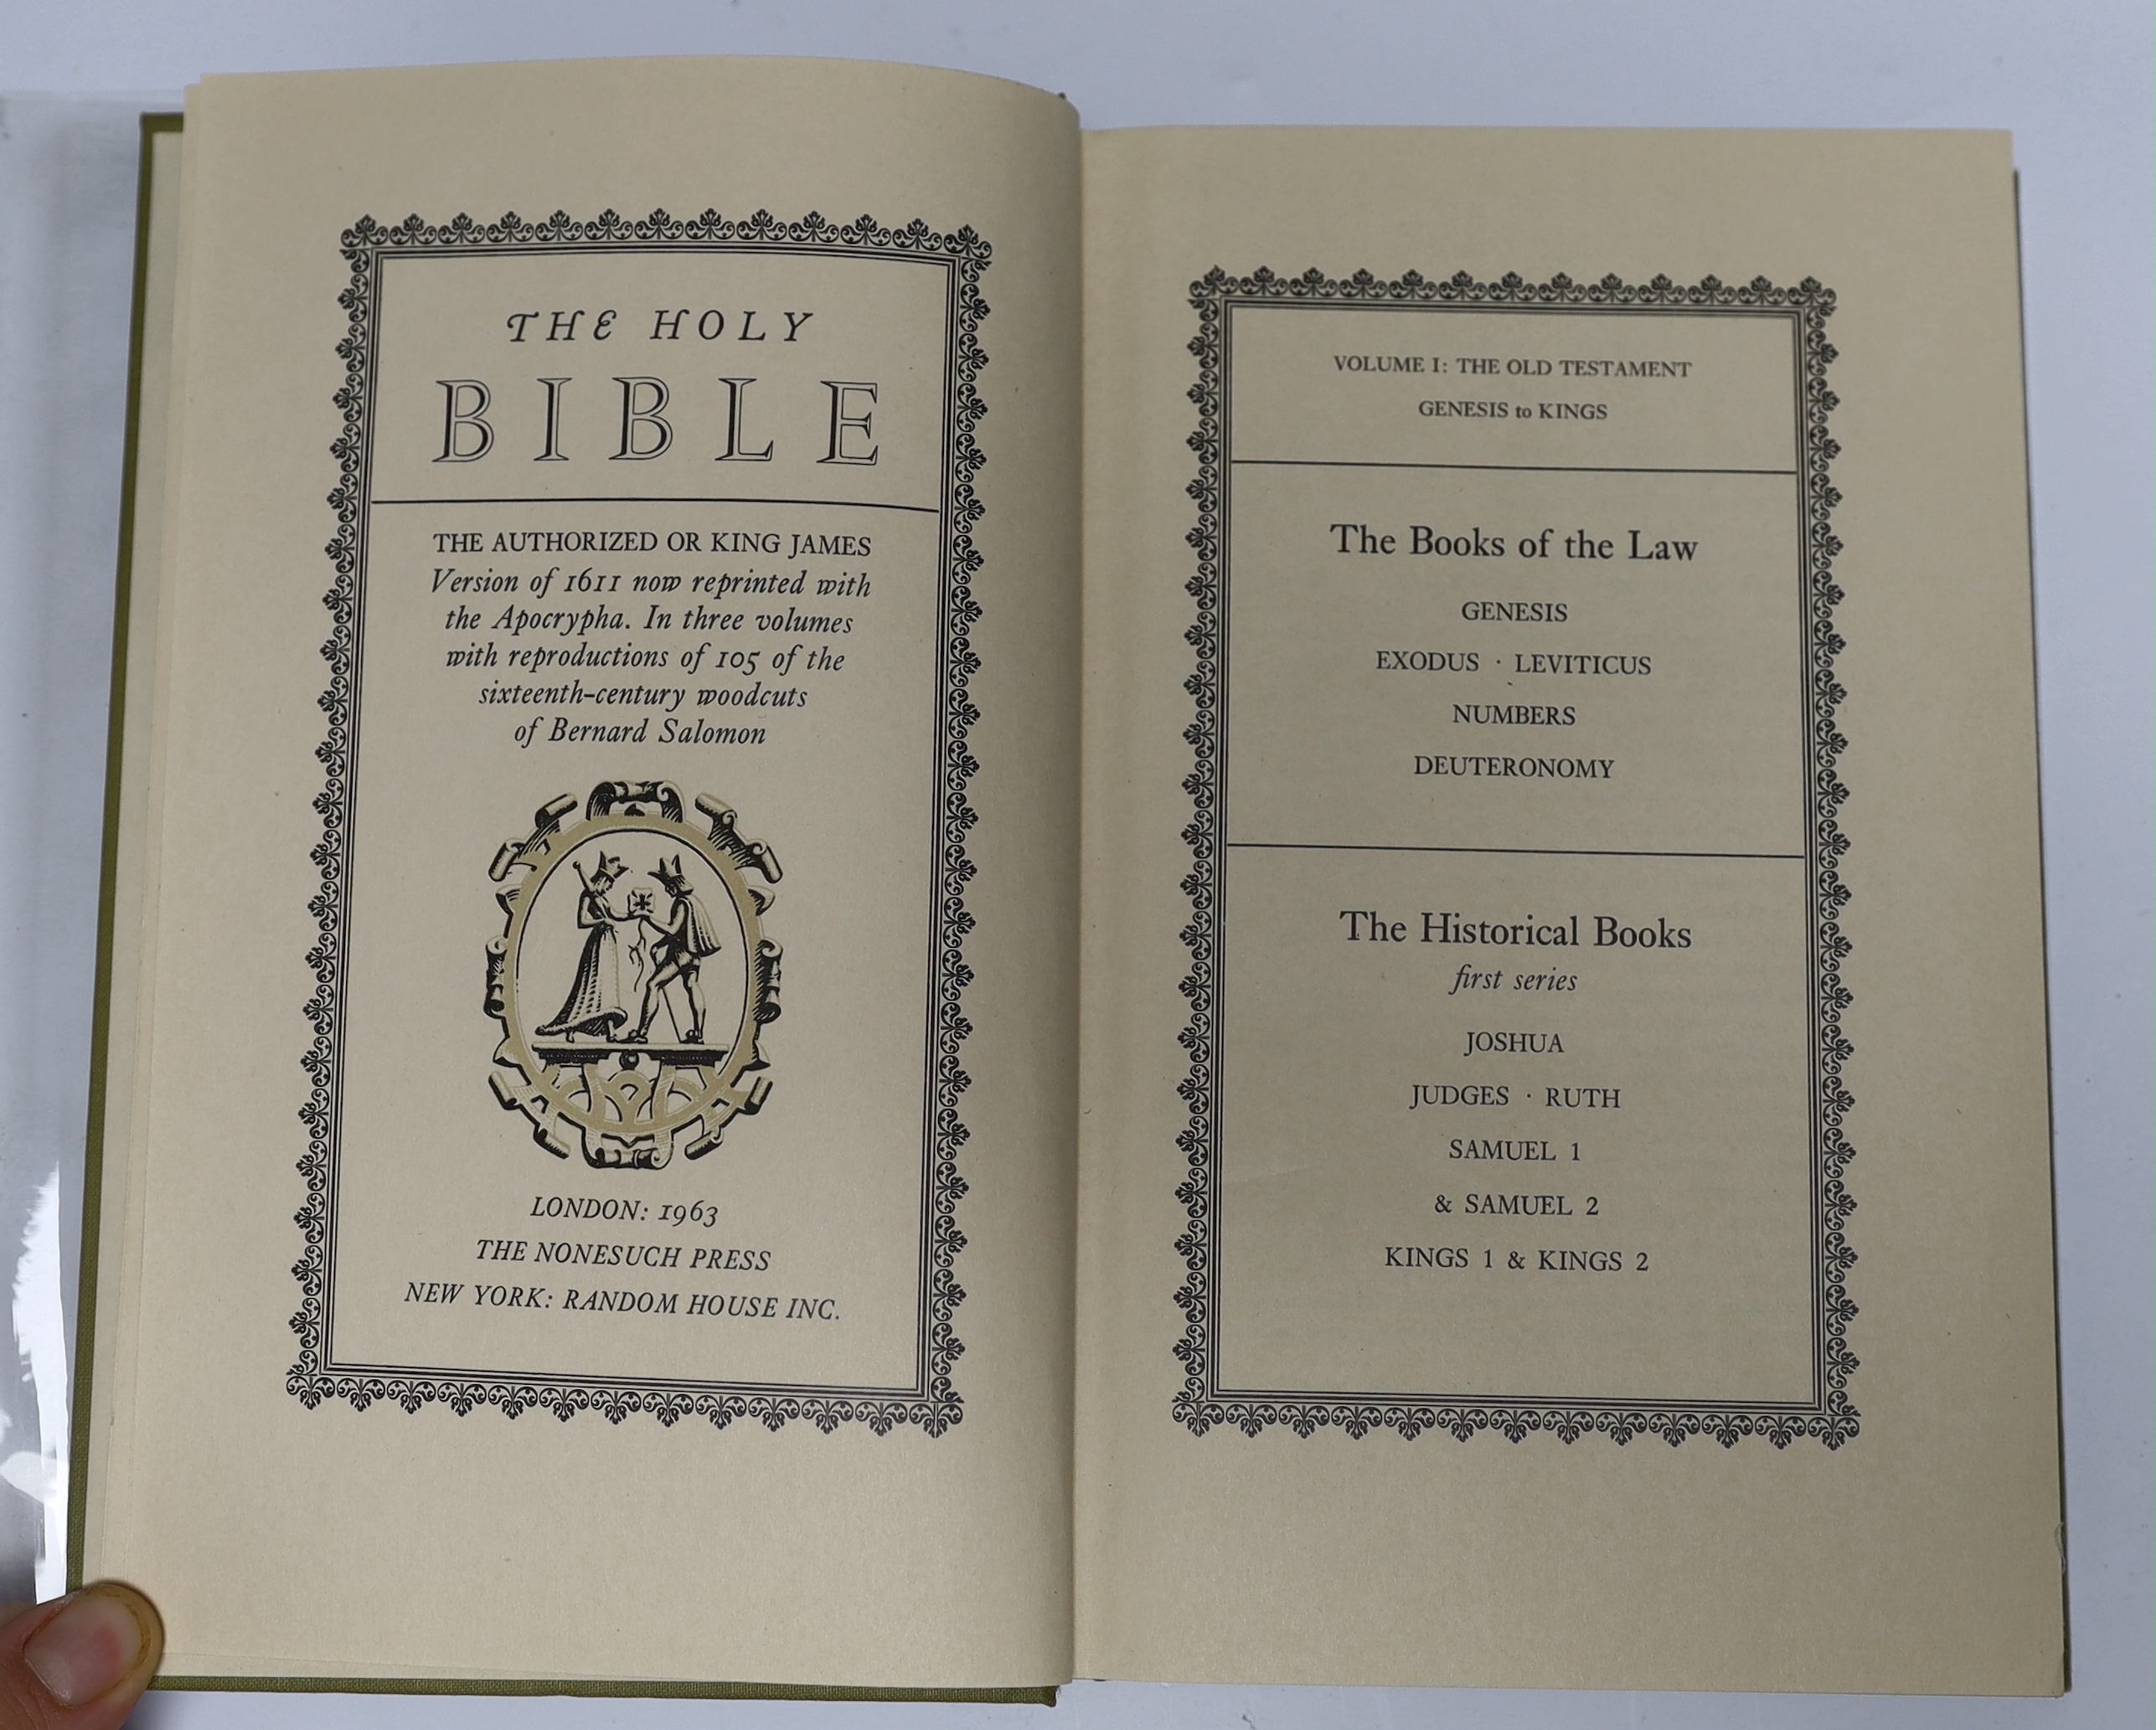 ° ° The Nonesuch Press, "The Holy Bible" in three vols., pub. 1963 to include 105 woodcuts, green - Image 2 of 2